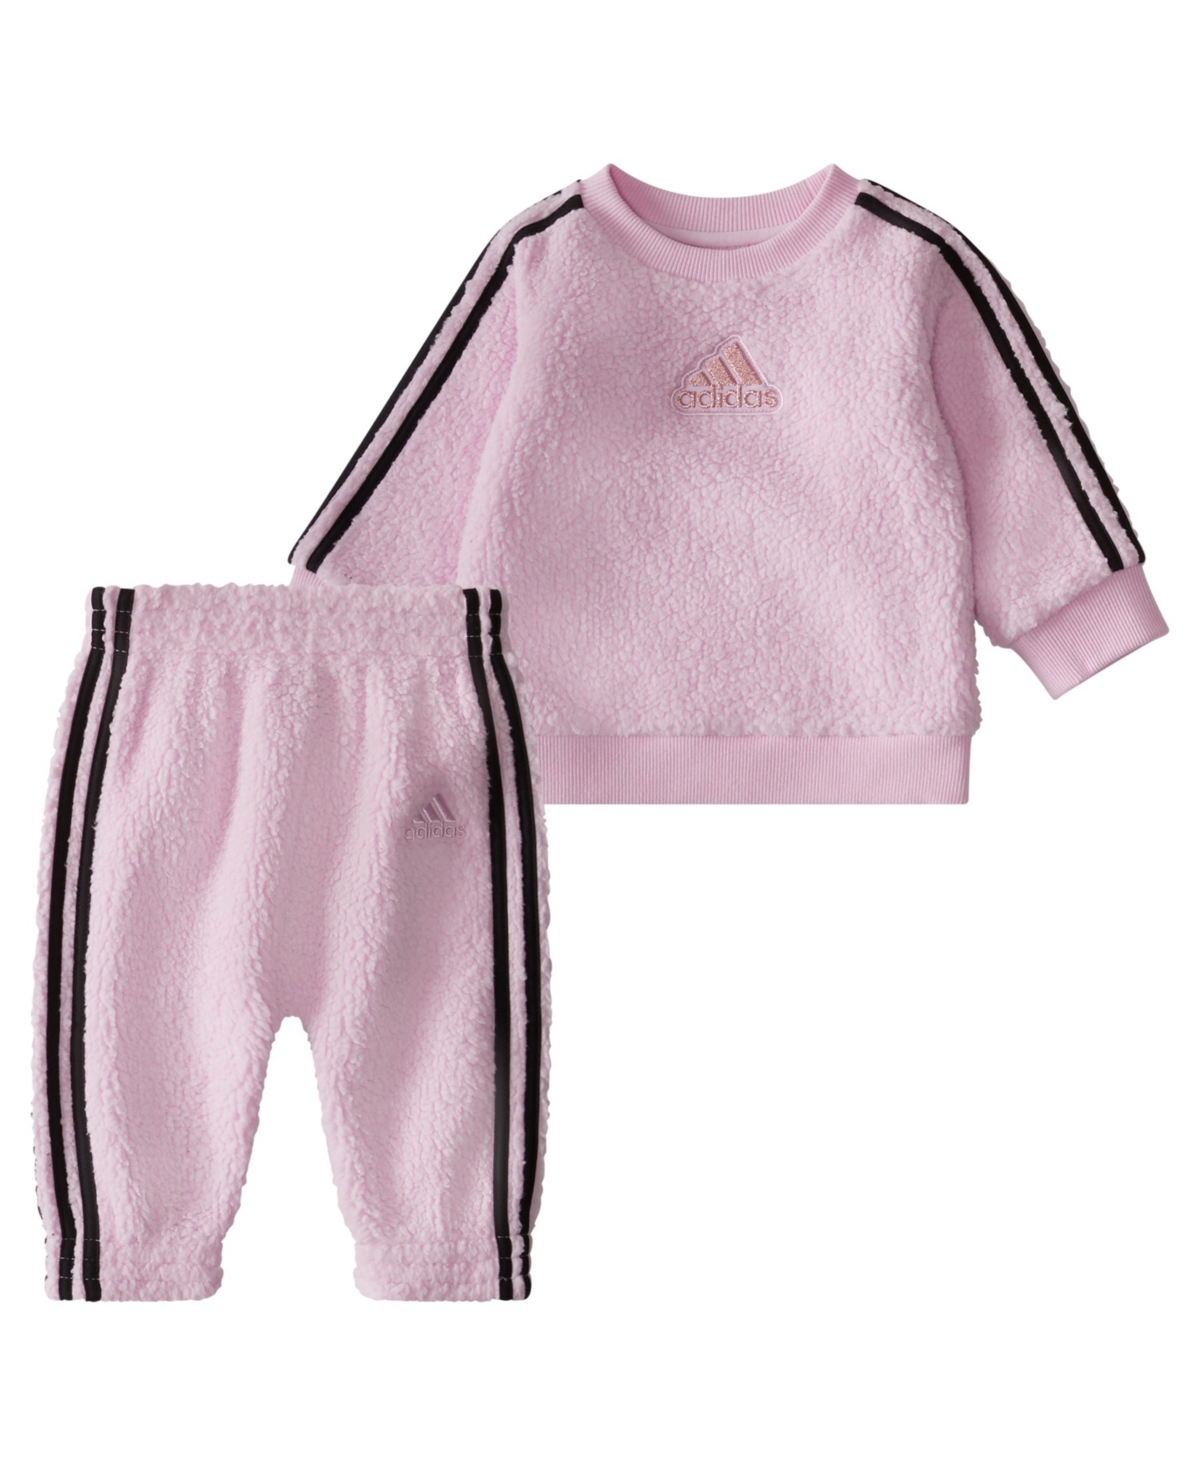 Adidas Originals Baby Girls Cozy Long Sleeve Top And Pants, 2 Piece Set In Orchid Fusion